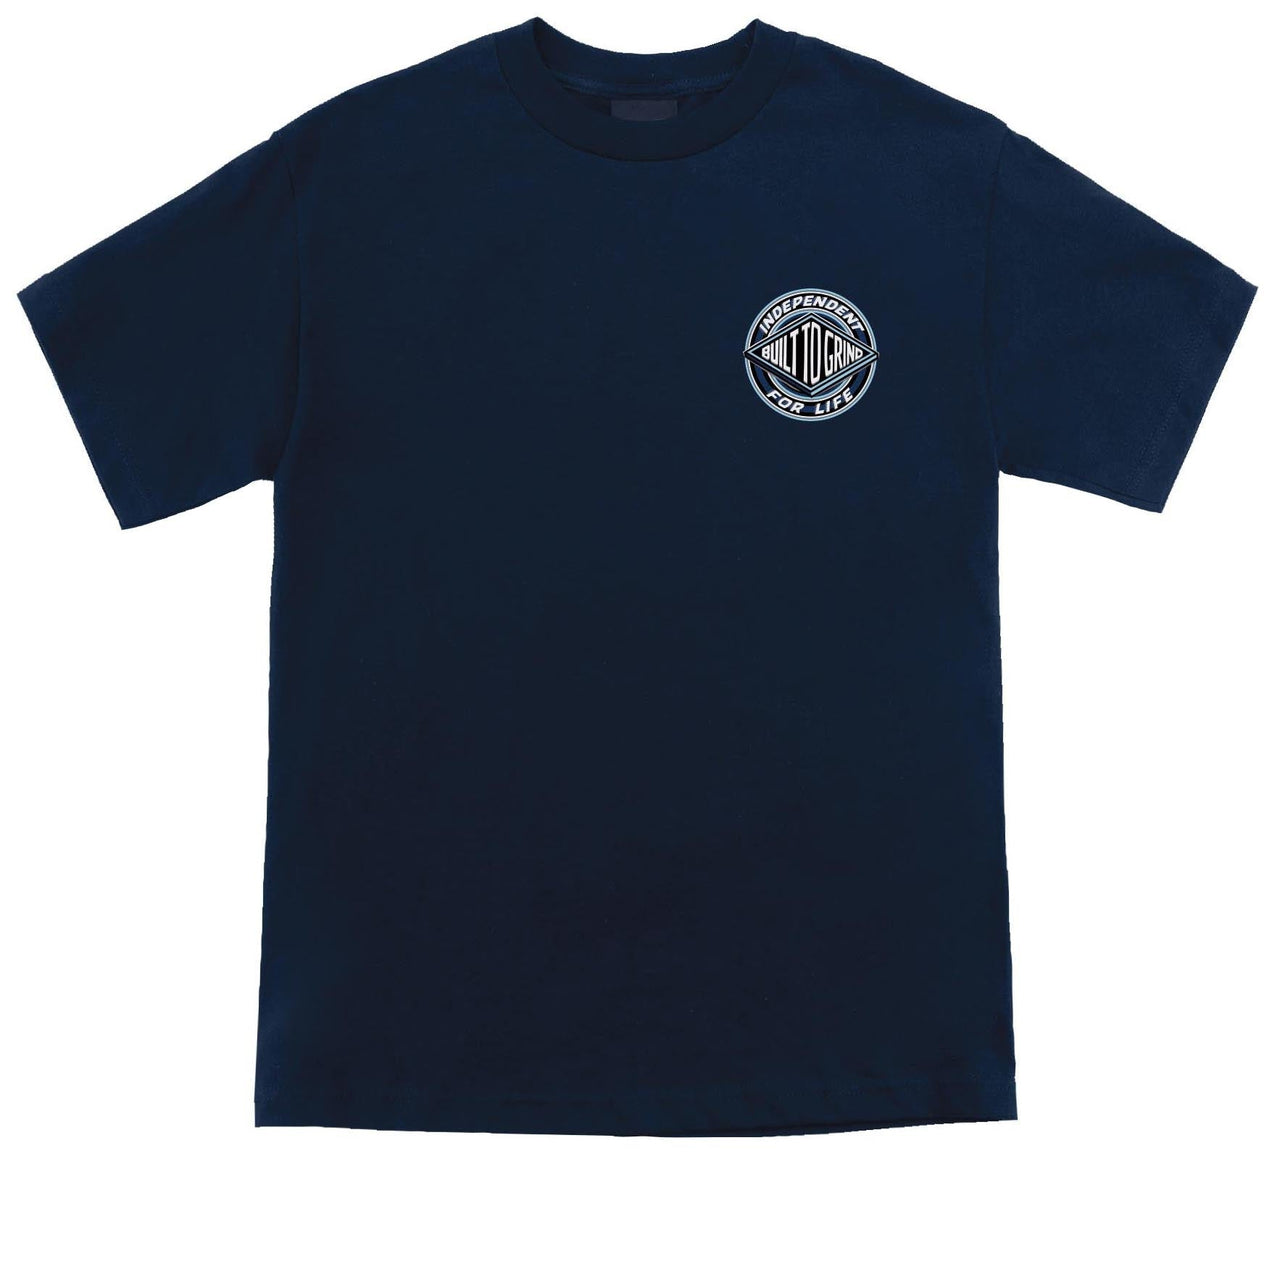 Independent For Life Clutch T-Shirt - Navy image 2